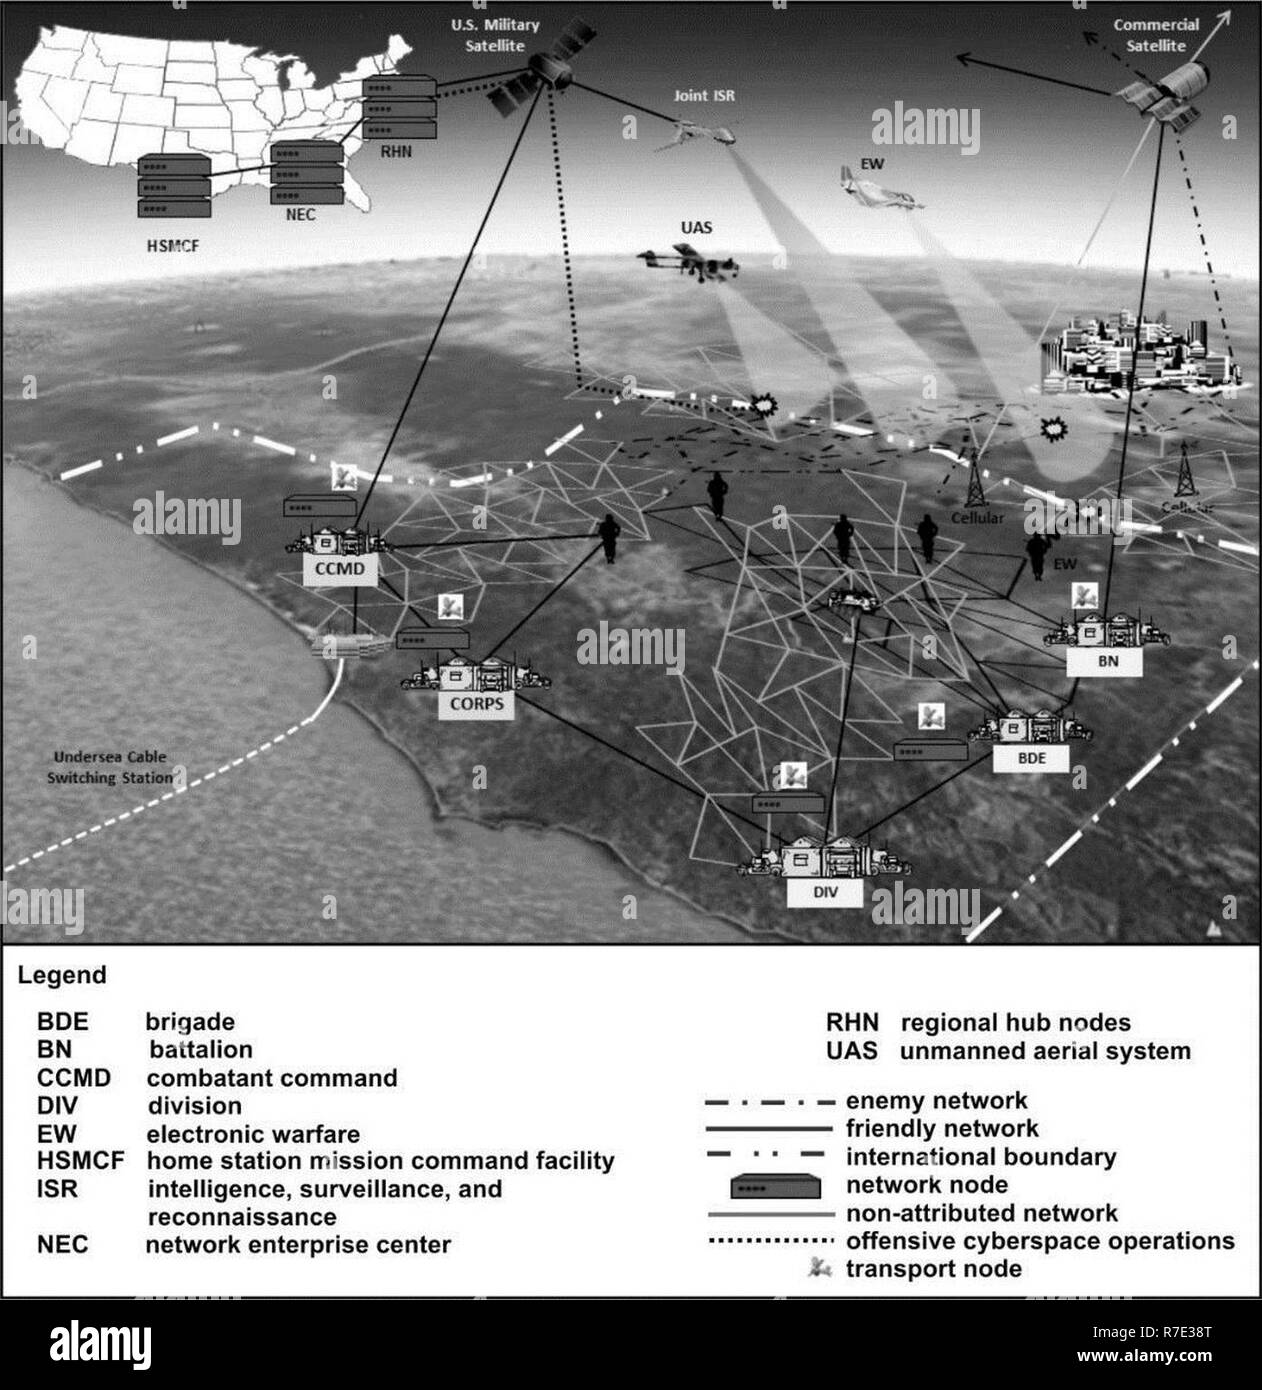 The Cyberspace and Electronic Warfare Operations Field Manual 3-12, Figure  1-1,  is a visual  representation  of cyberspace and use of the electromagnetic spectrum in an operational environment. Stock Photo